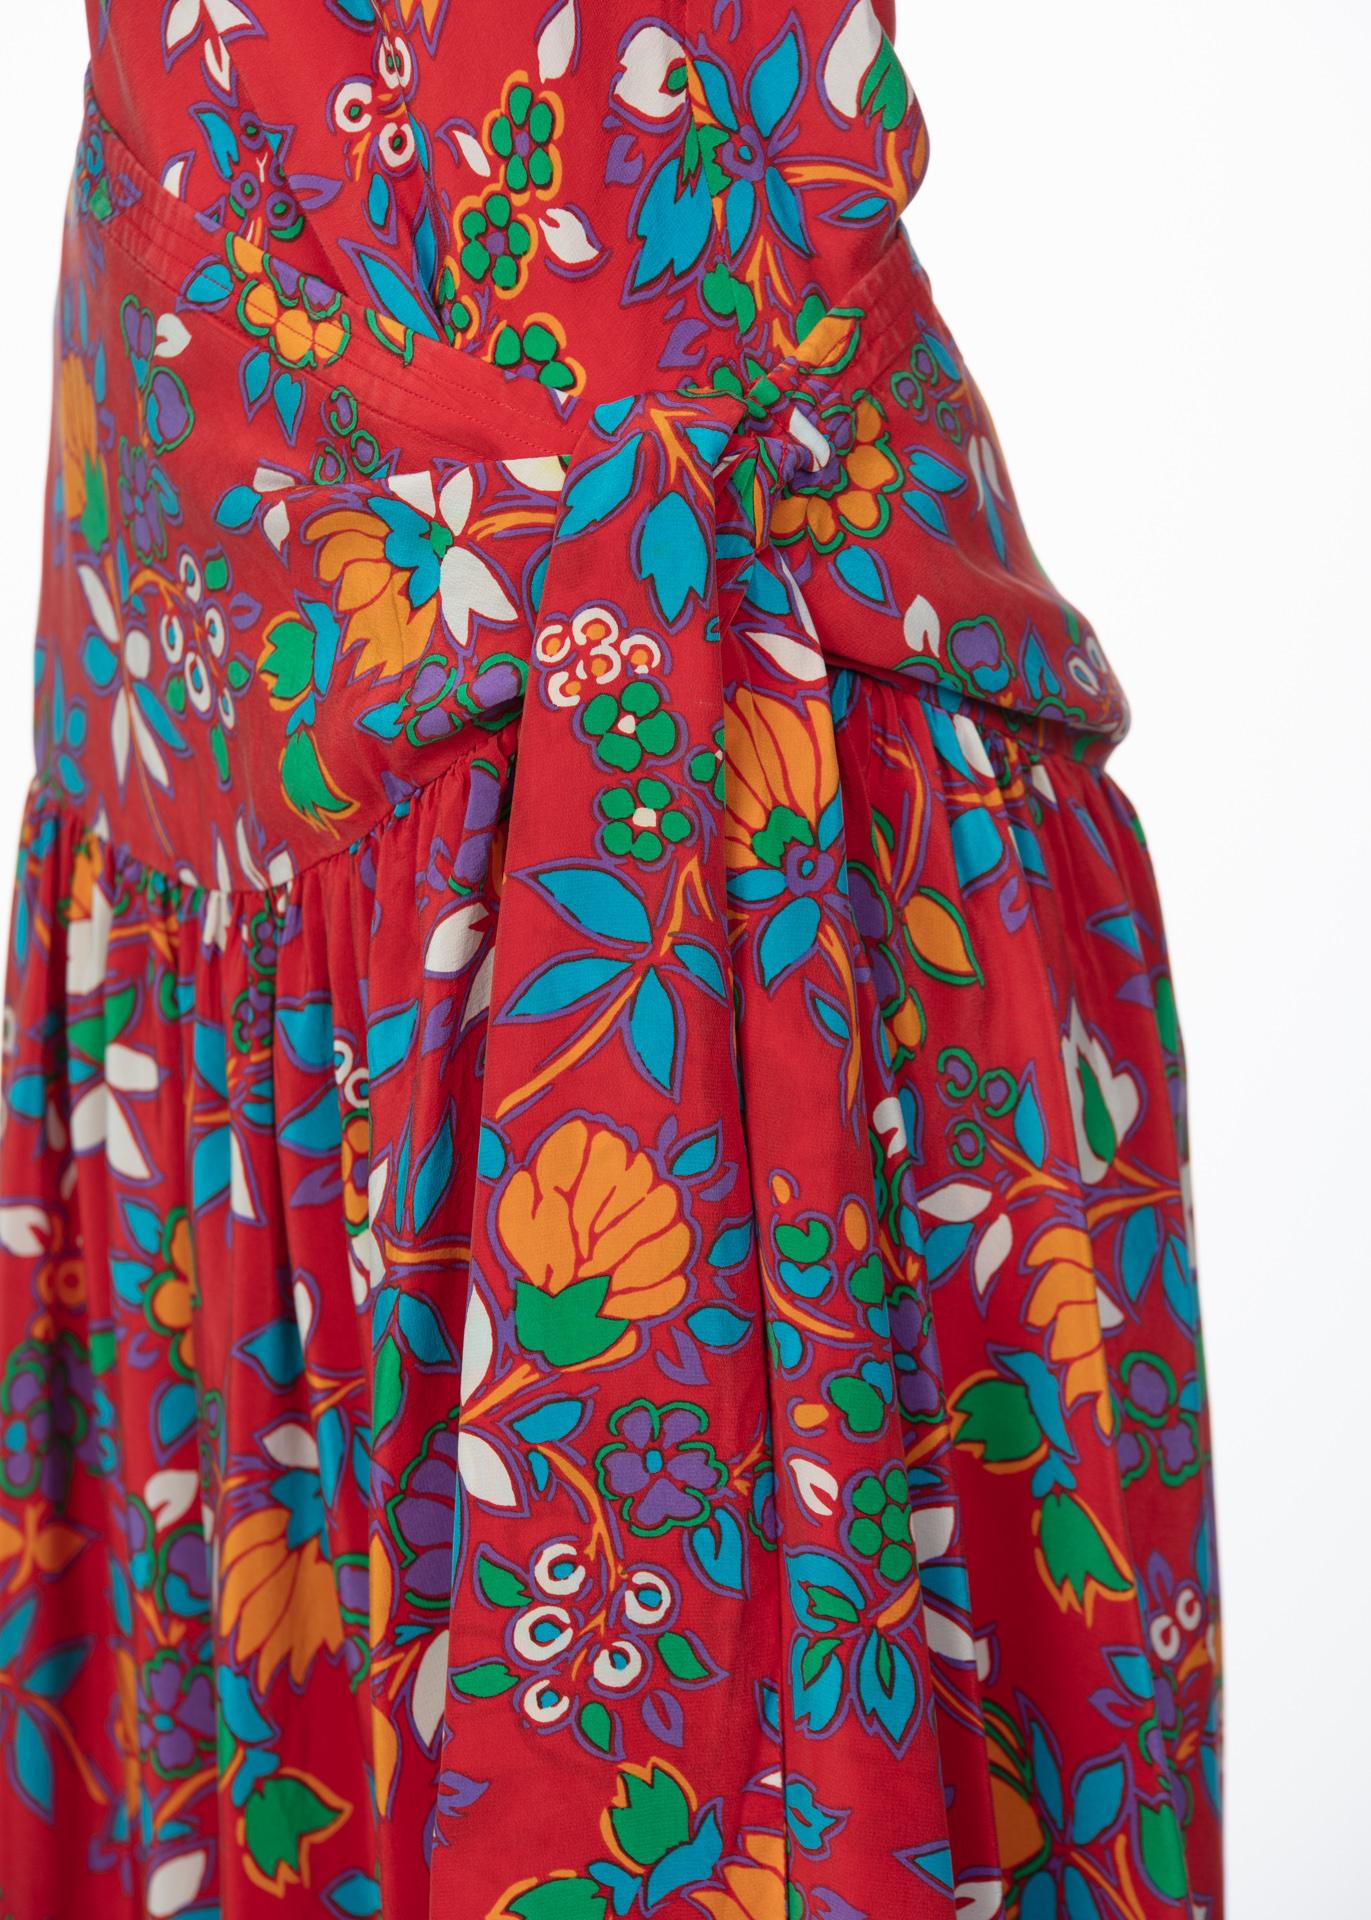 Yves Saint Laurent YSL Multicolor Floral Print Top and Skirt Set, 1980s  1